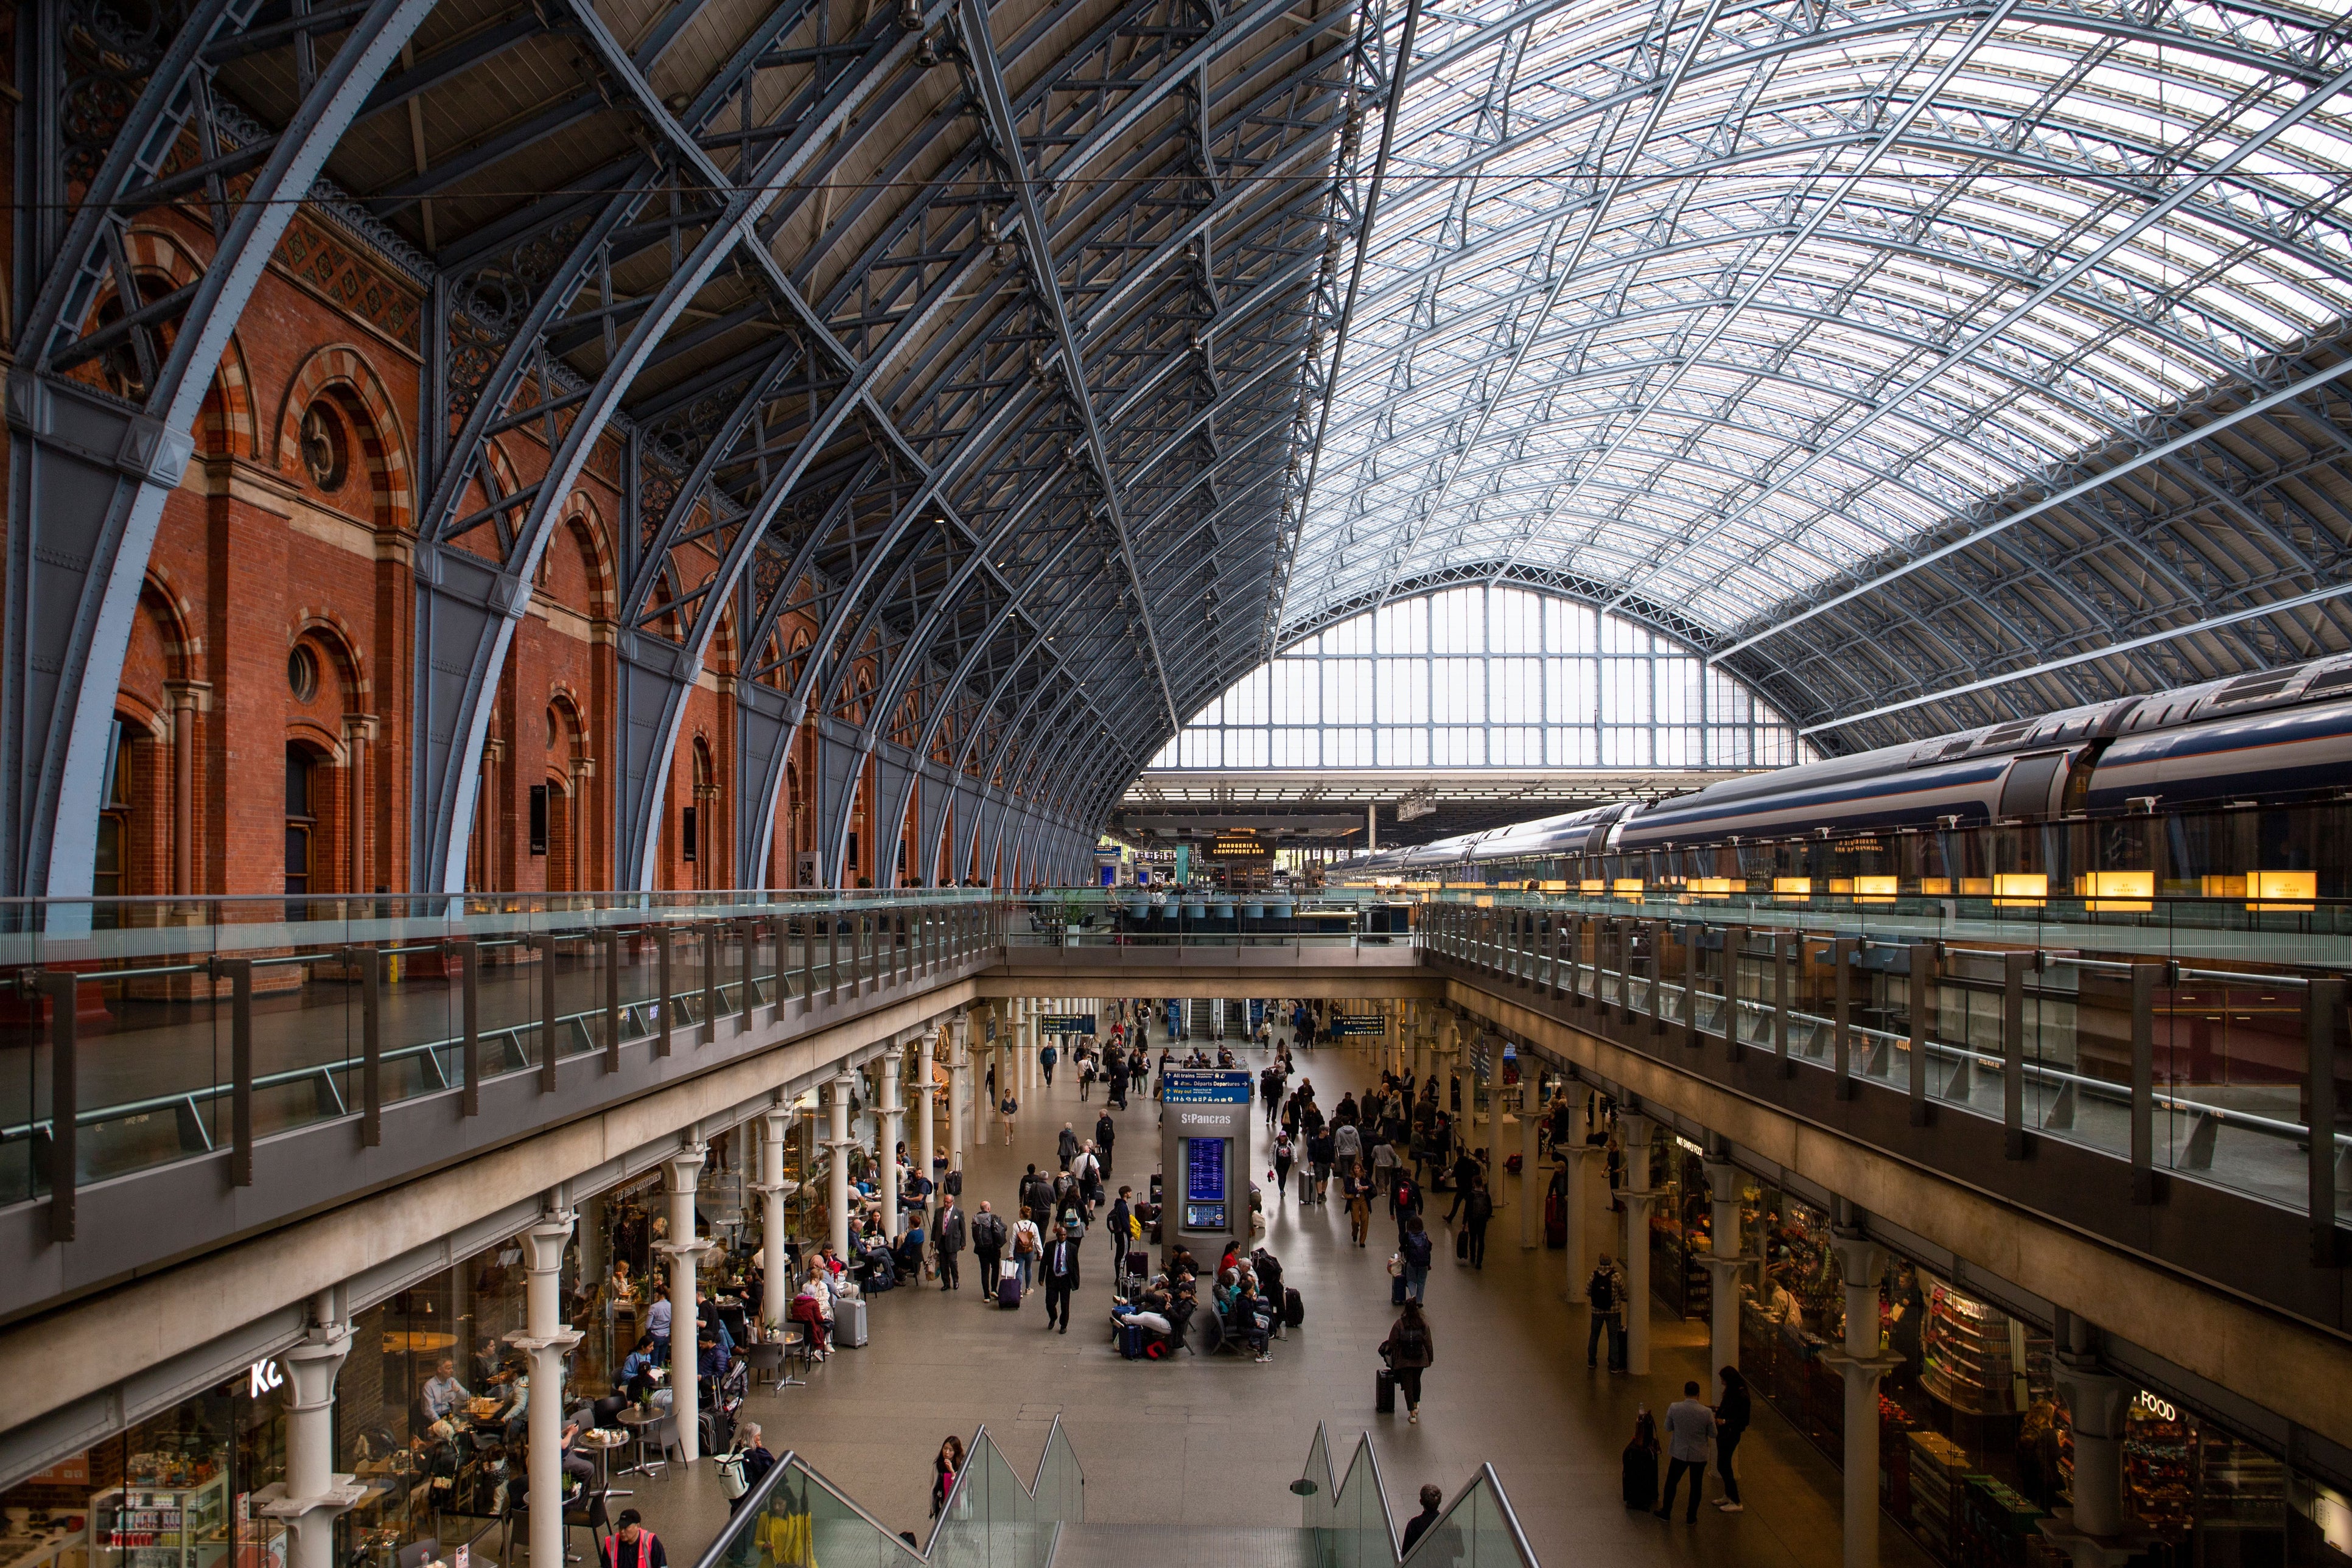 Hassle-free HS1: St Pancras International can now process up to 2,000 passengers per hour through its border control